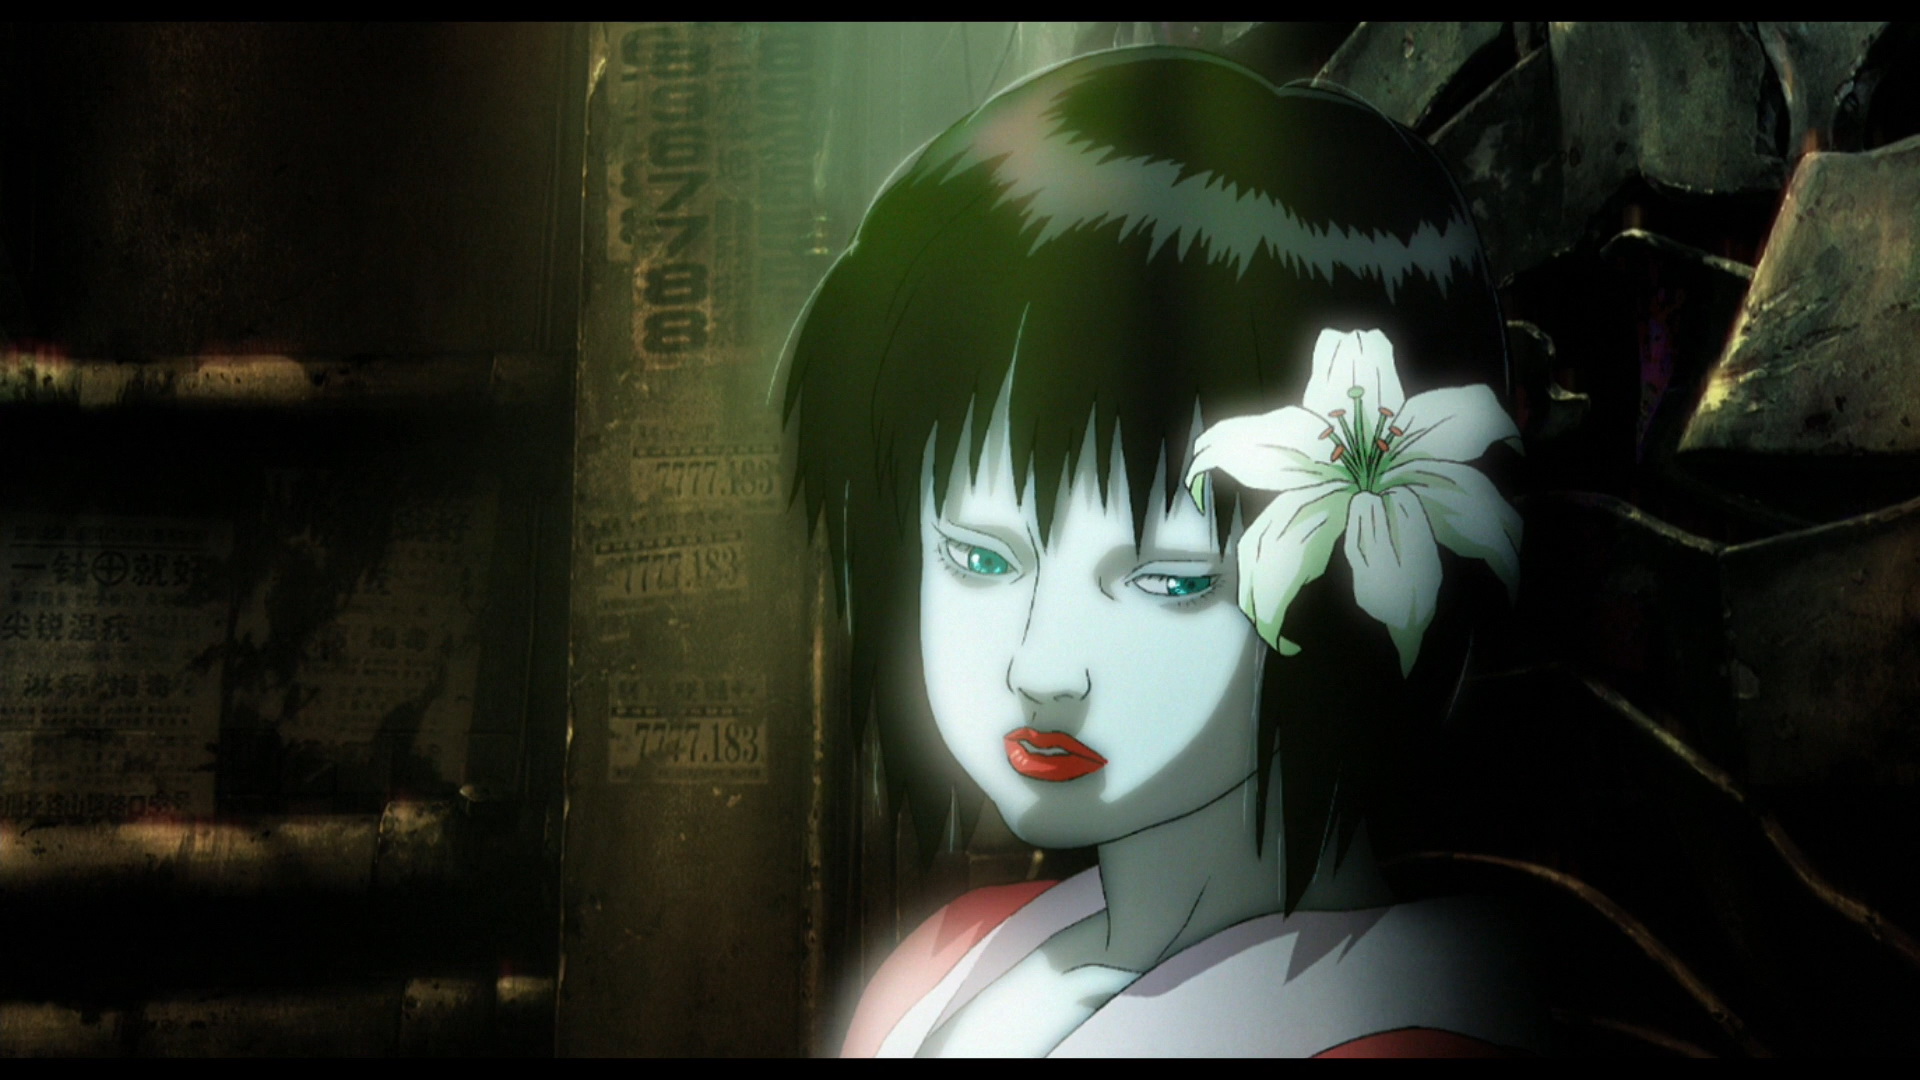 Anime Ghost In The Shell Hd Wallpaper